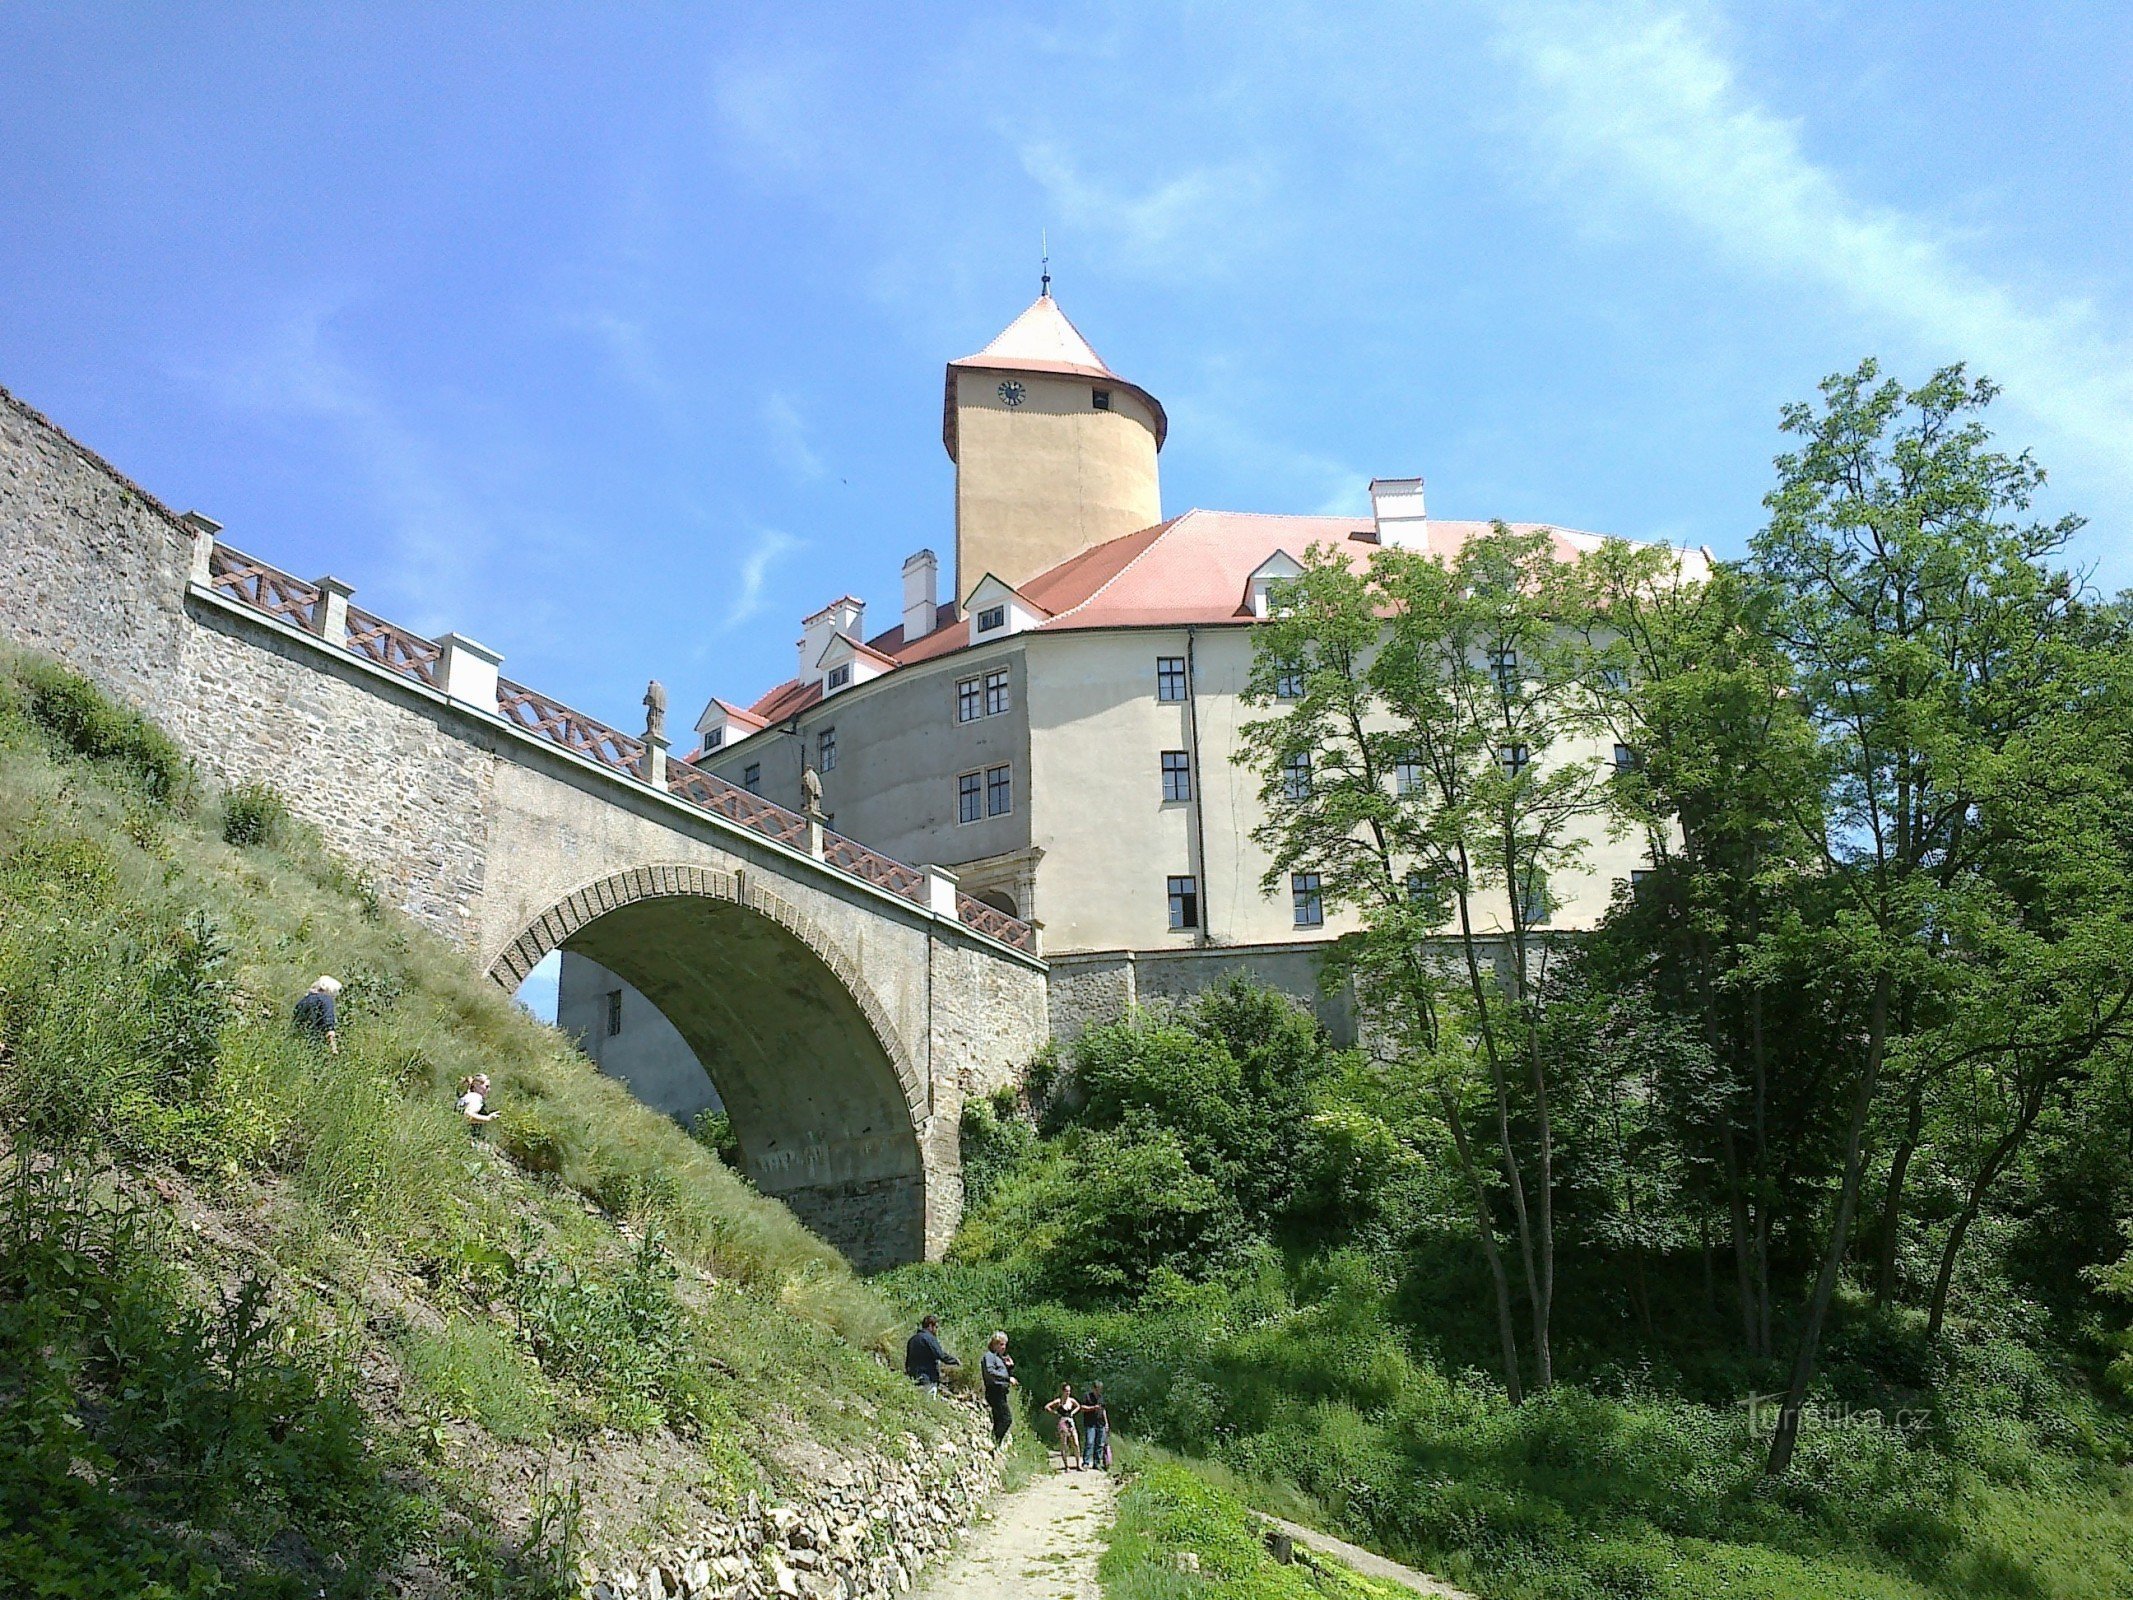 Bottom view of the castle